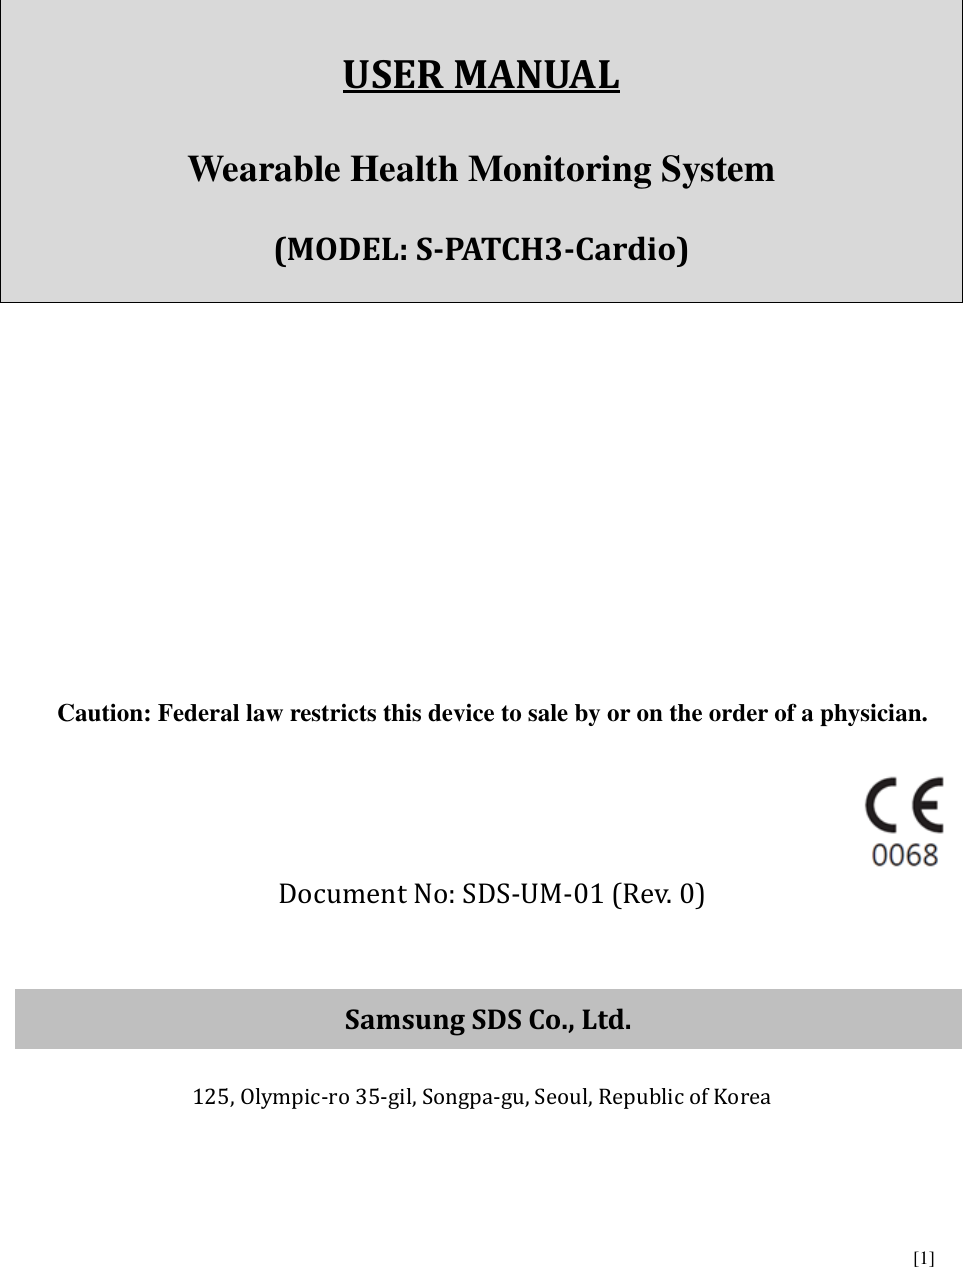      [1]       USER MANUAL  Wearable Health Monitoring System    (MODEL: S-PATCH3-Cardio)          Caution: Federal law restricts this device to sale by or on the order of a physician.   Document No: SDS-UM-01 (Rev. 0)   Samsung SDS Co., Ltd.  125, Olympic-ro 35-gil, Songpa-gu, Seoul, Republic of Korea    